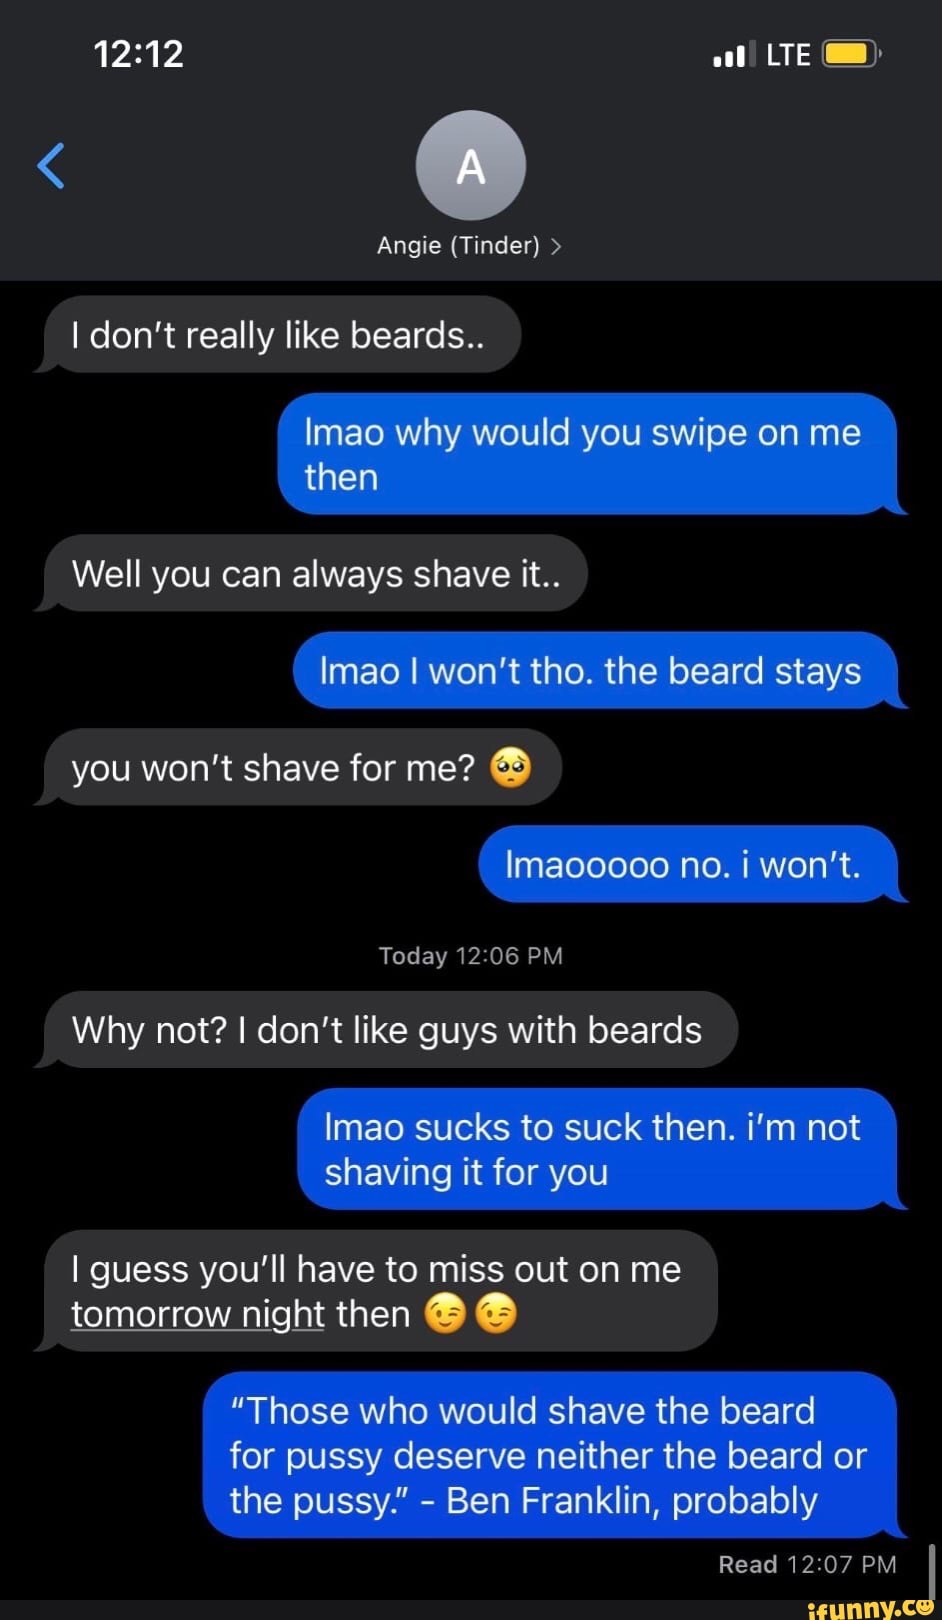 Those who would shave the beard for pussy